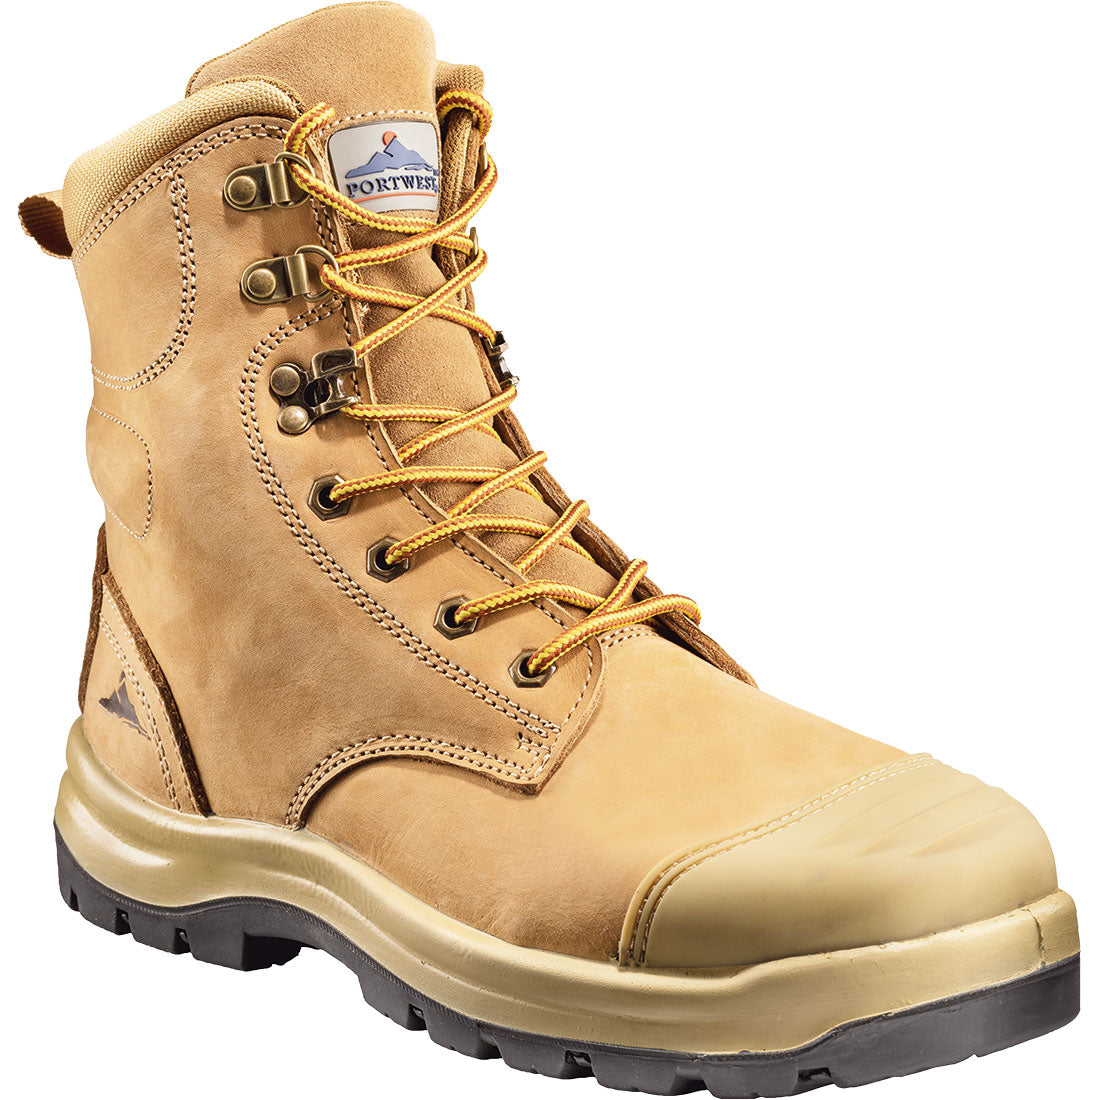 Rockley High Zip And Lace Up Safety Boot - made by Portwest